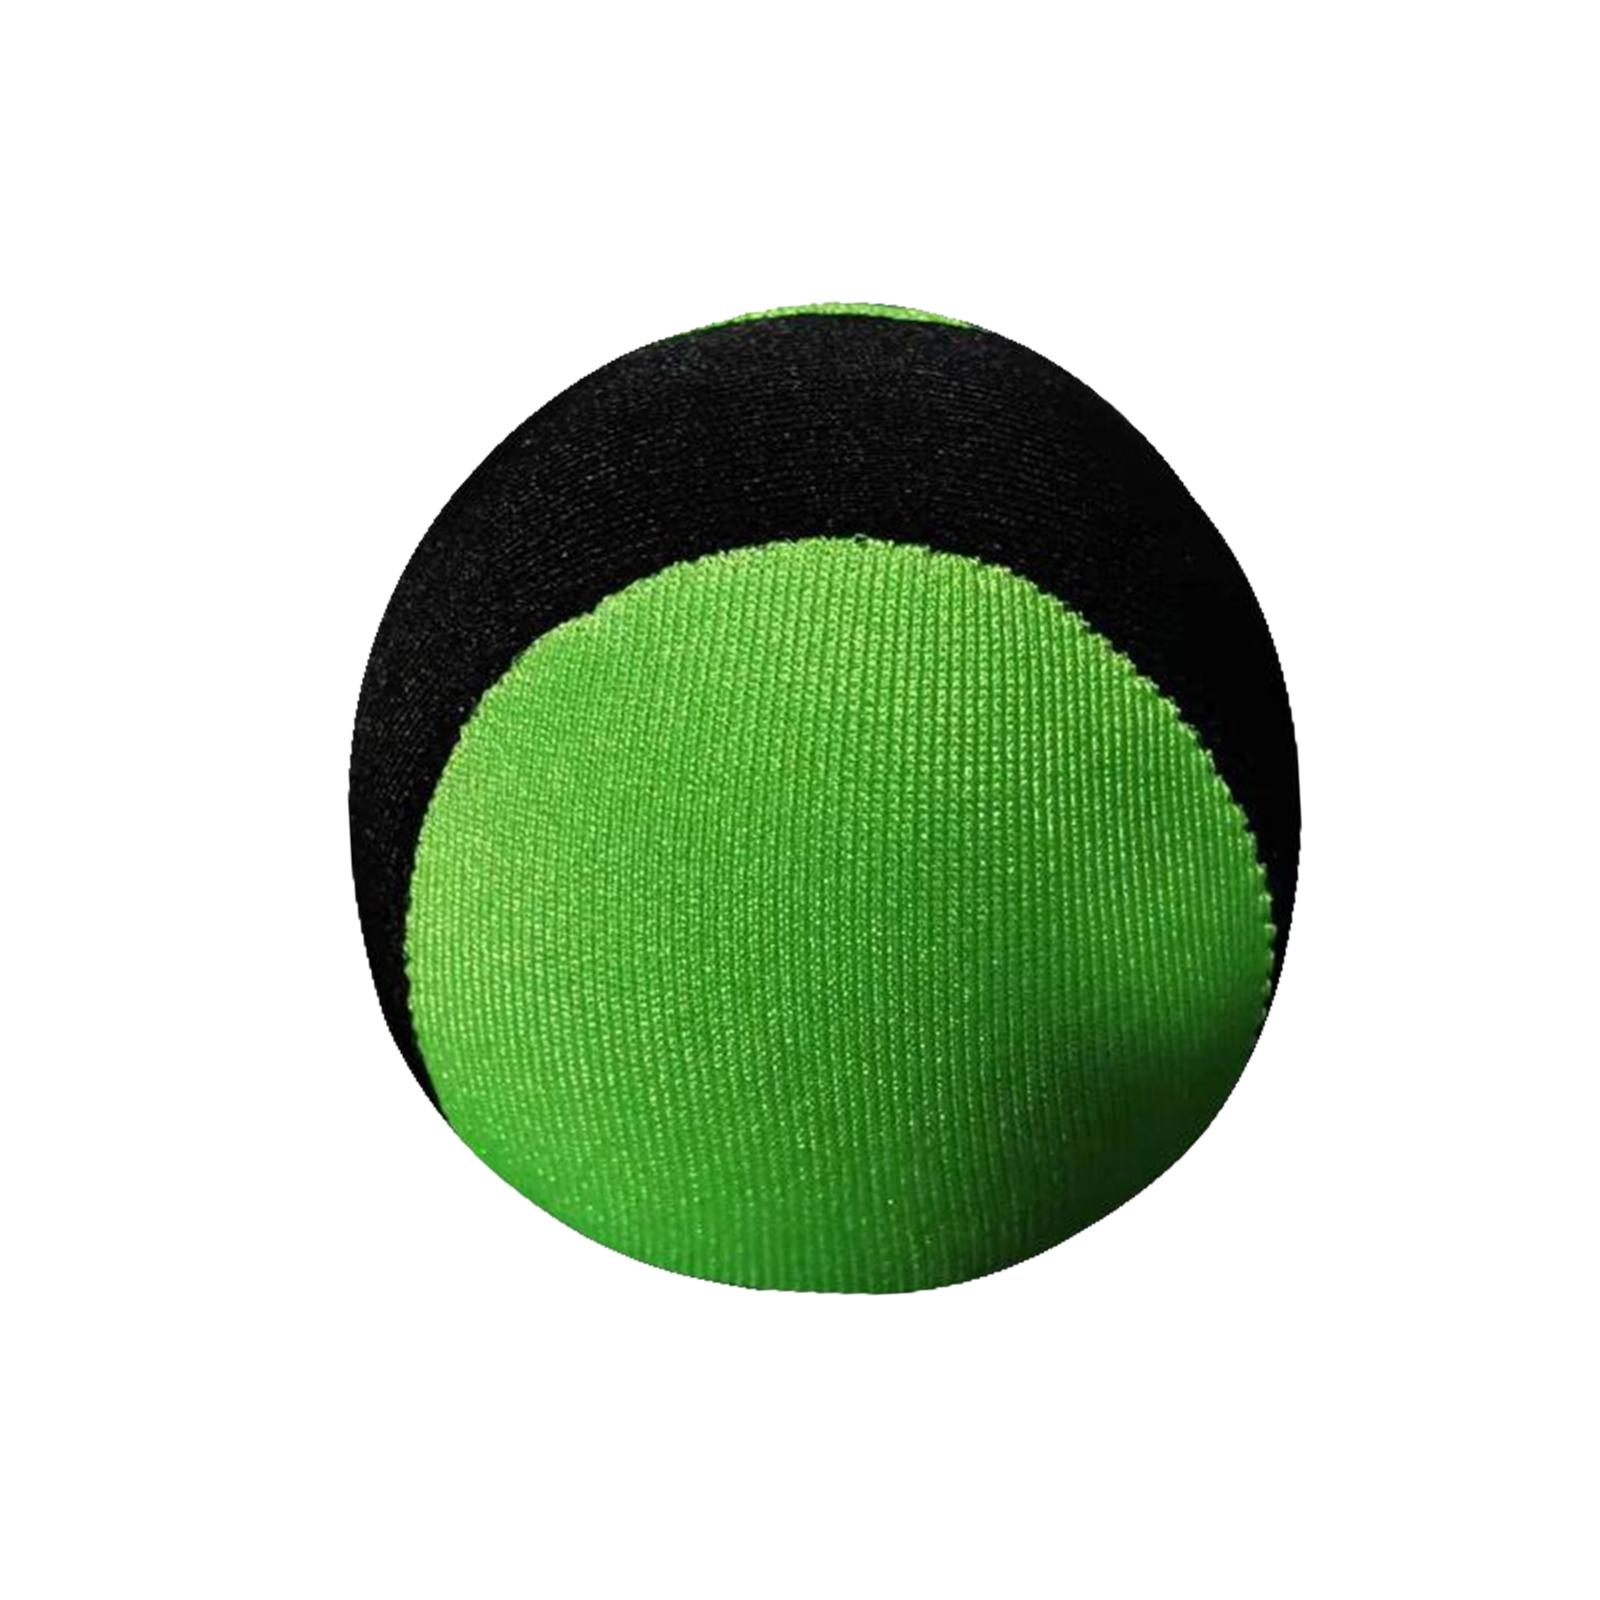 Bouncing Ball Sensory Toy Soft Relax Skipping Ball for Games Holiday Outdoor Light Green 55mm